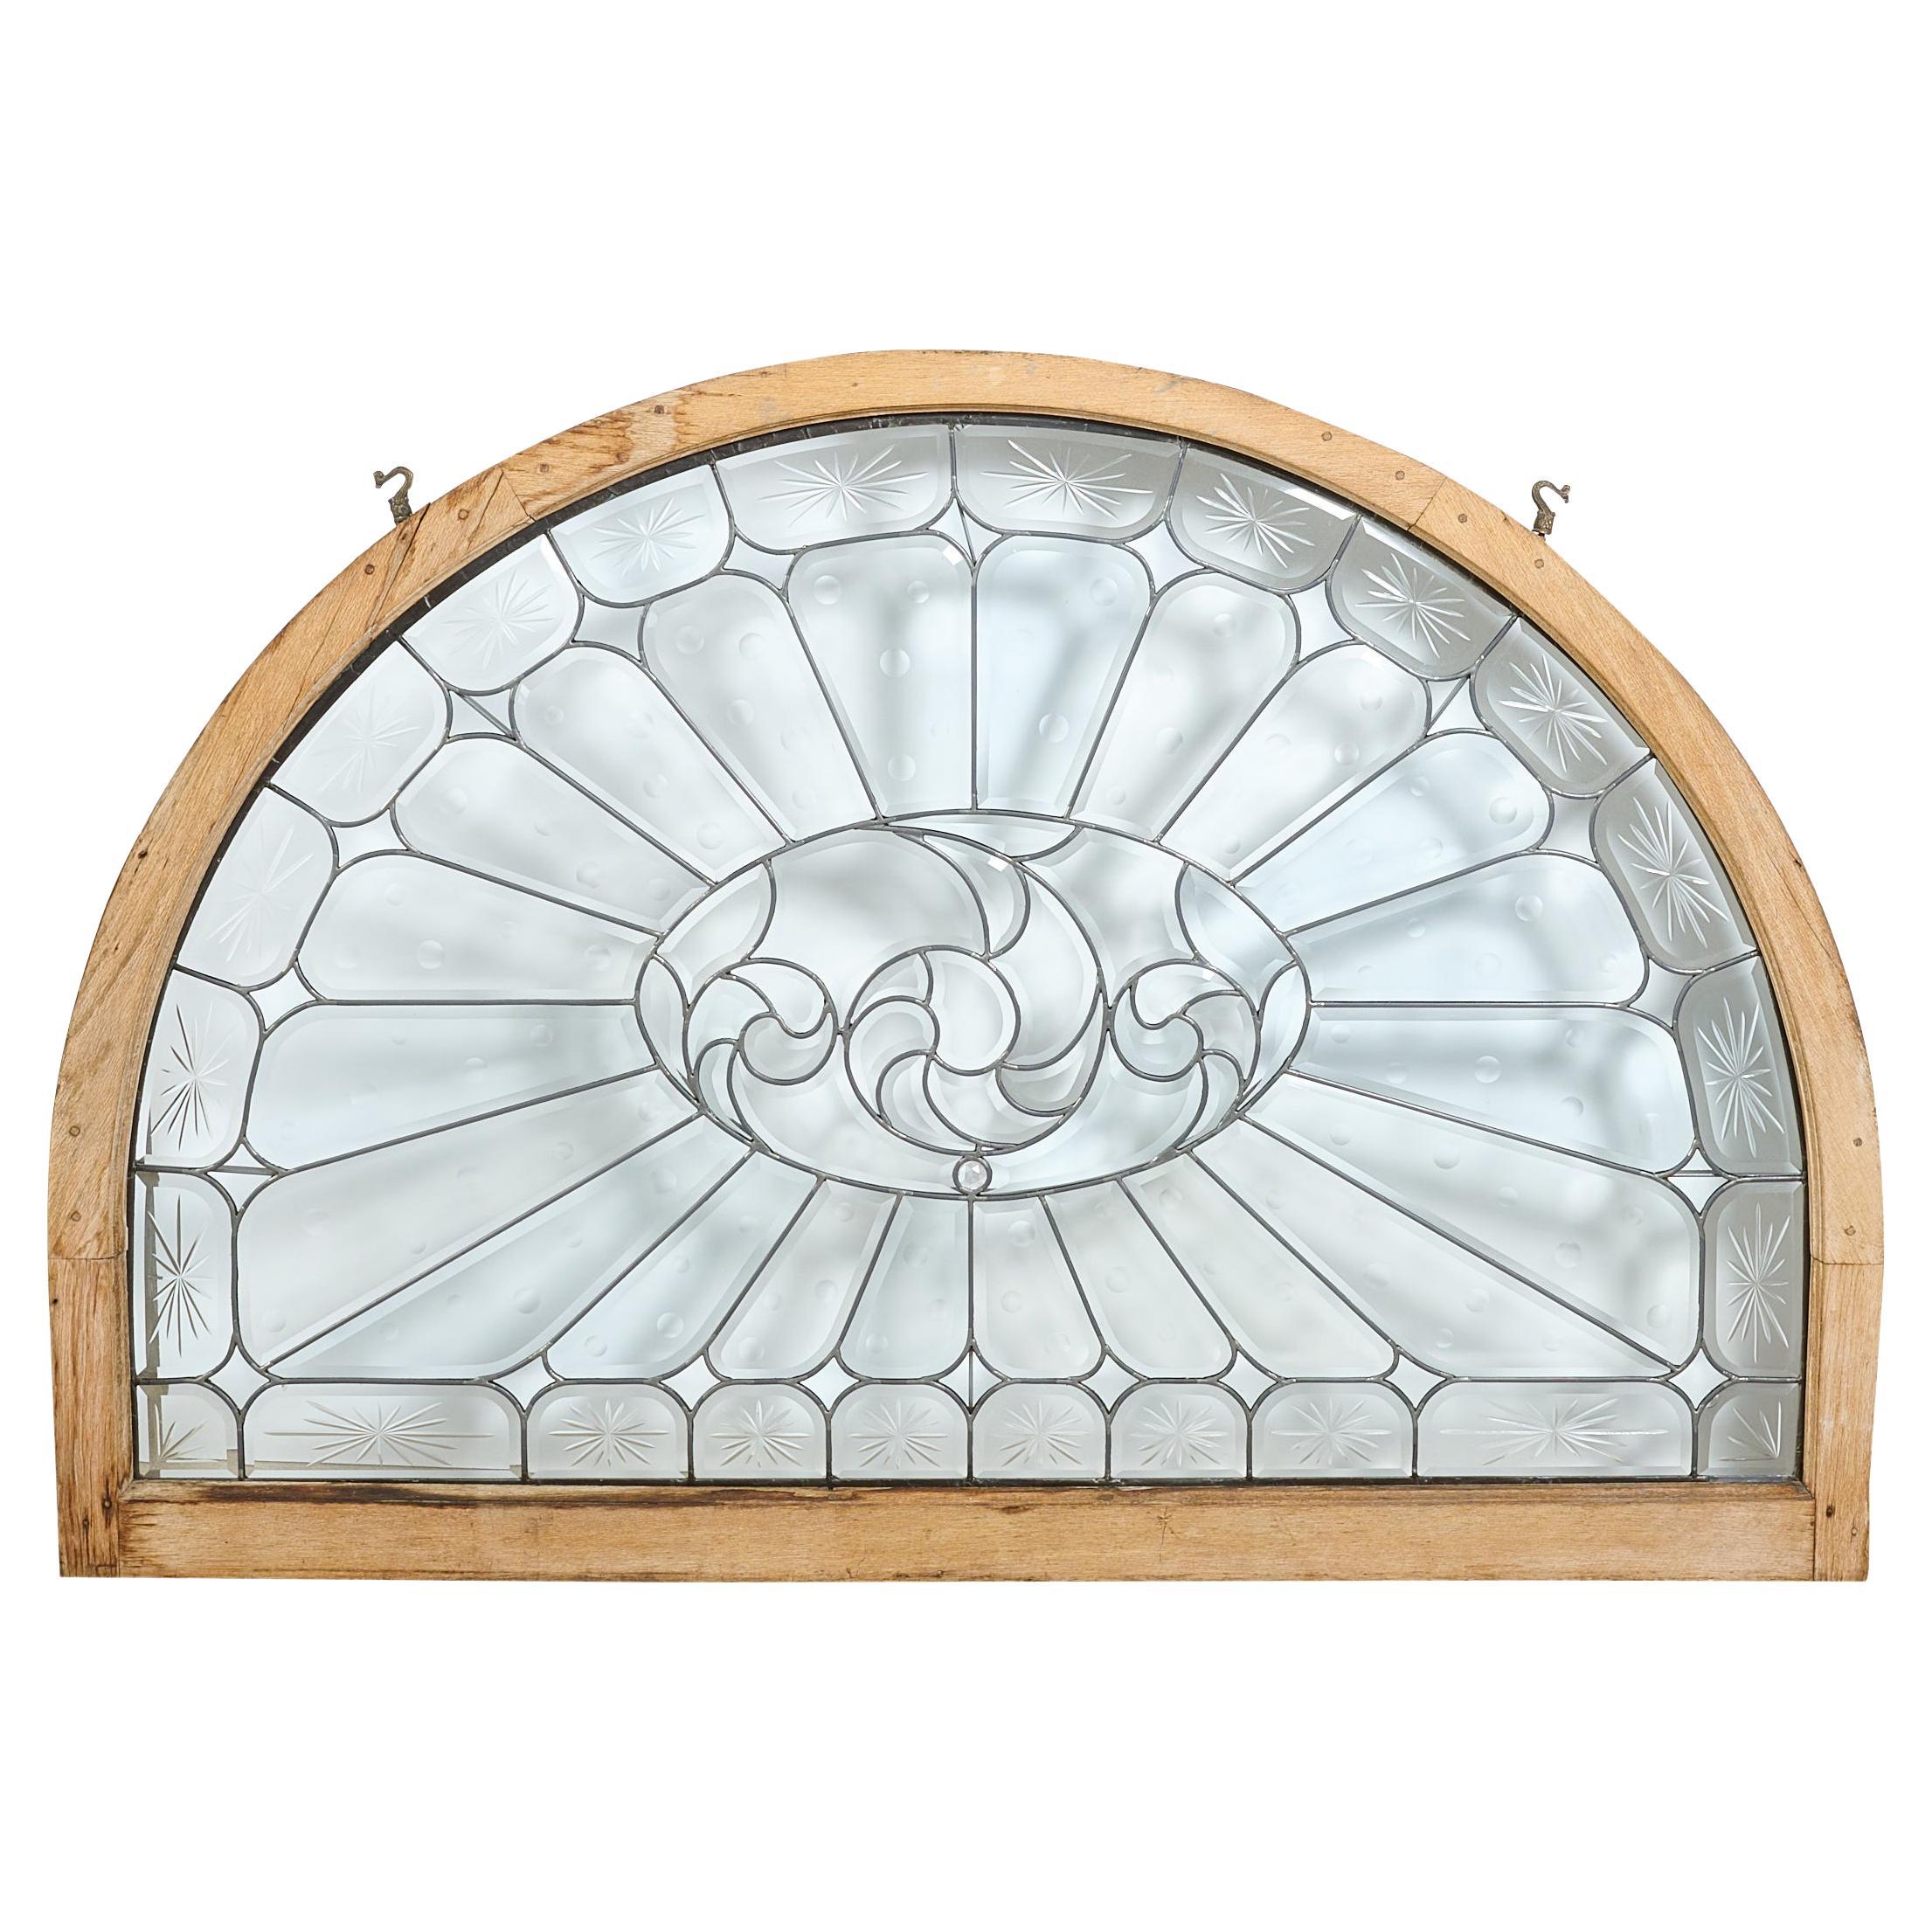 What is an arch window?